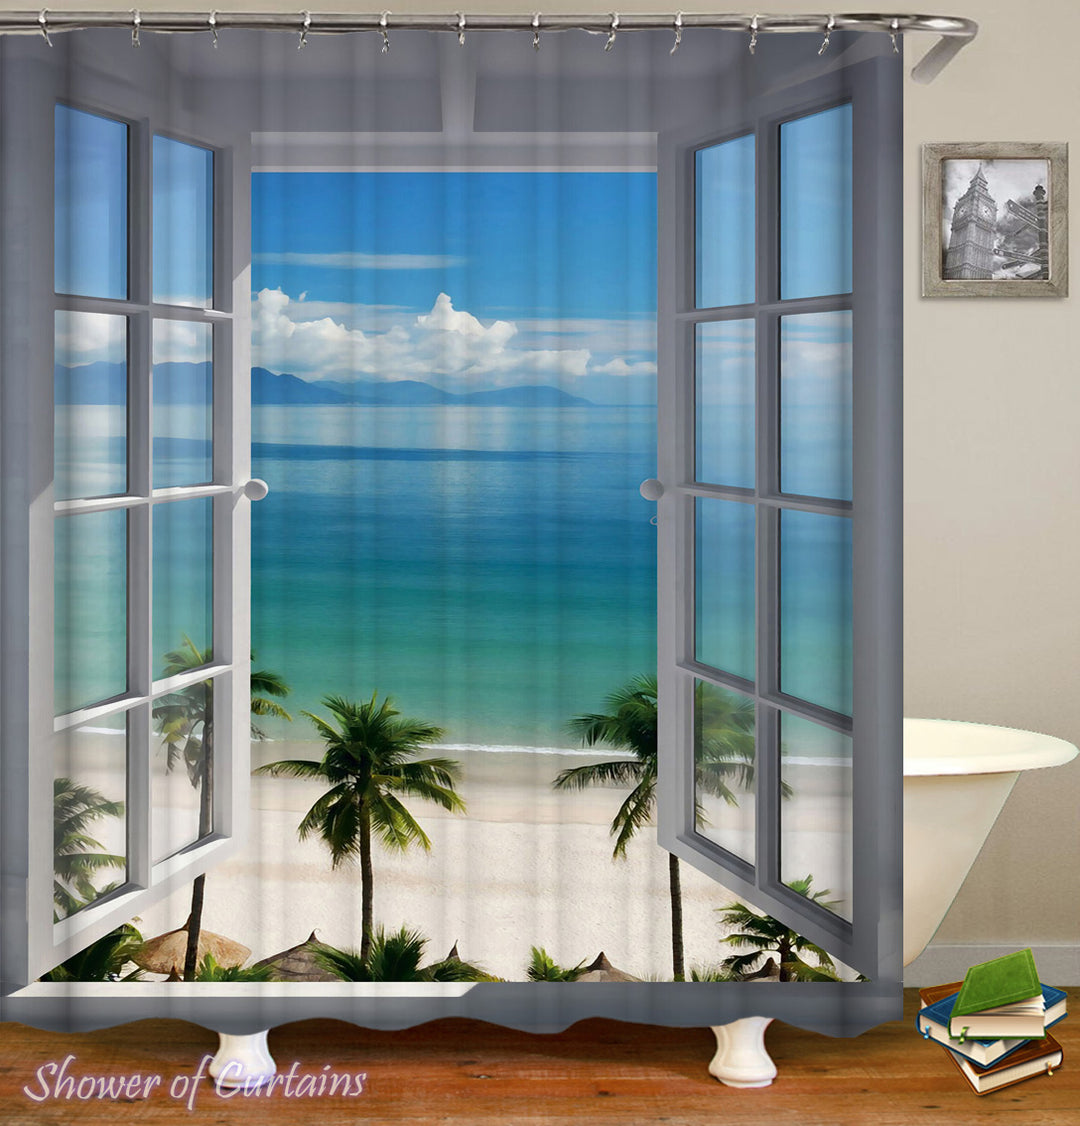 Tropical shower curtains - A Window To Paradise